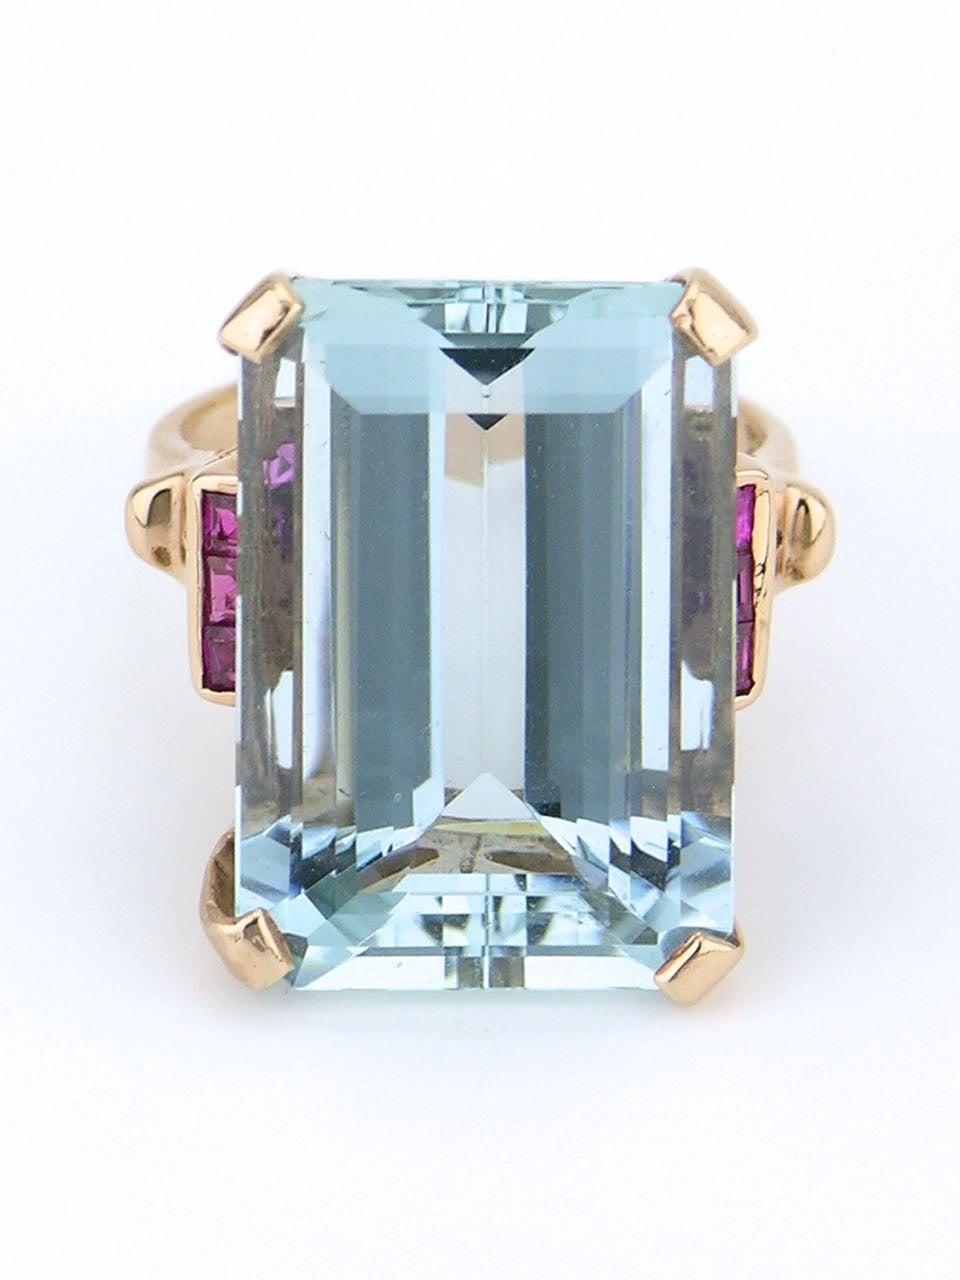 A large emerald cut aquamarine of 23.75cts with three square cut rubies on each side set in 14ct rose gold 

- aquamarine good clarity, good cut, light greyish blue 
- total weight  10.95grms 
- dimensions of face 22mm x 15mm 
- currently size